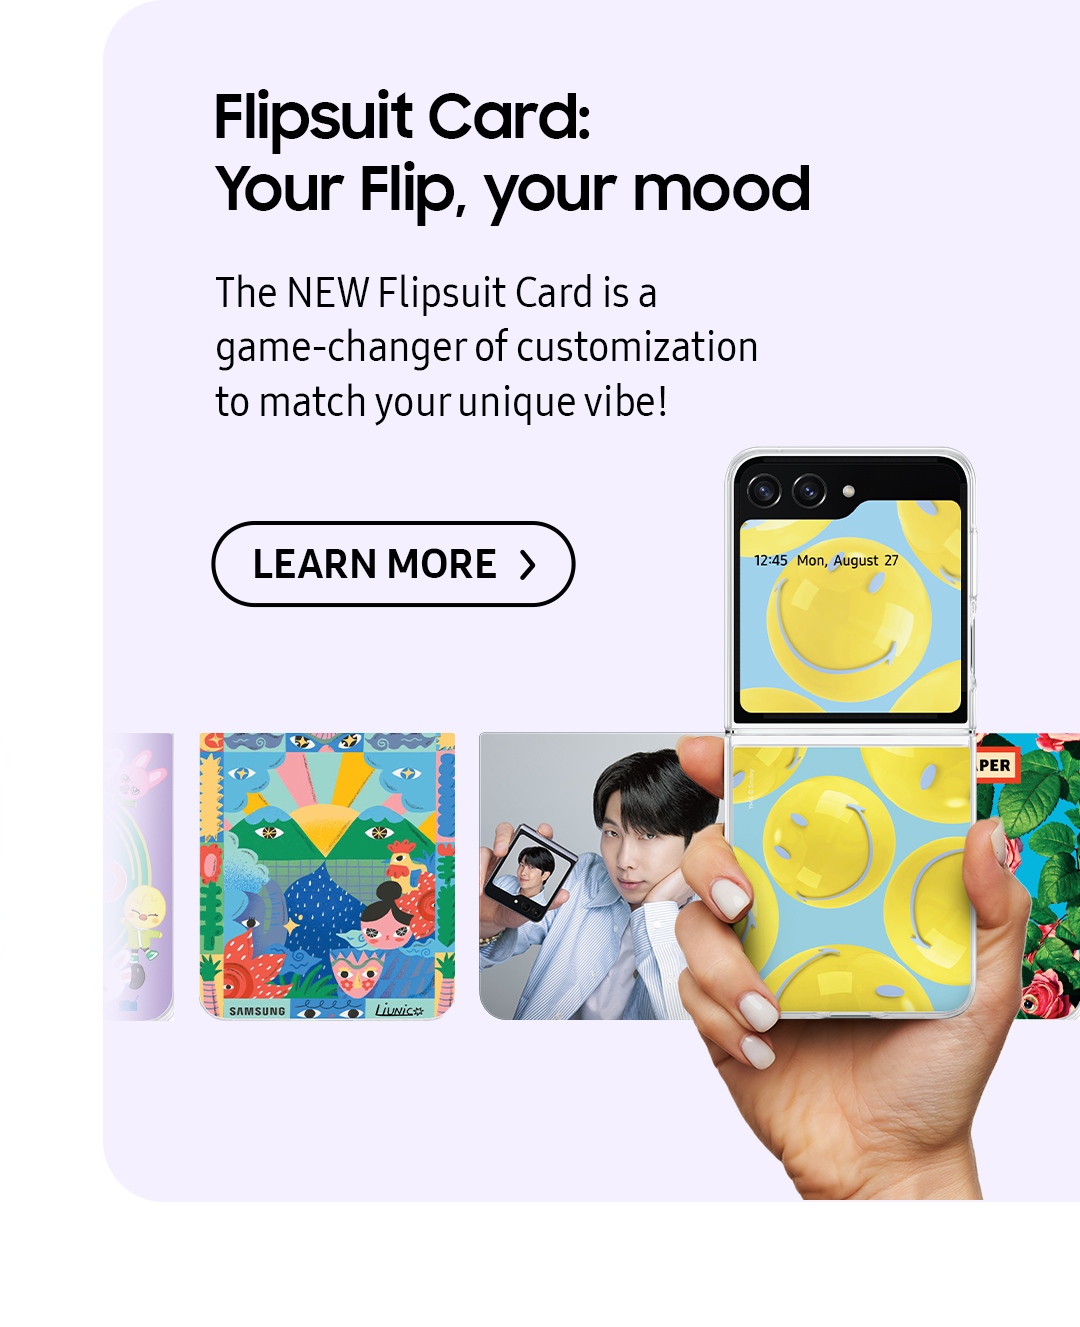 Flipsuit Card: Your Flip, your mood | The NEW Flipsuit Card is a game-changer for customization to match your unique vibe! Click here to learn more!